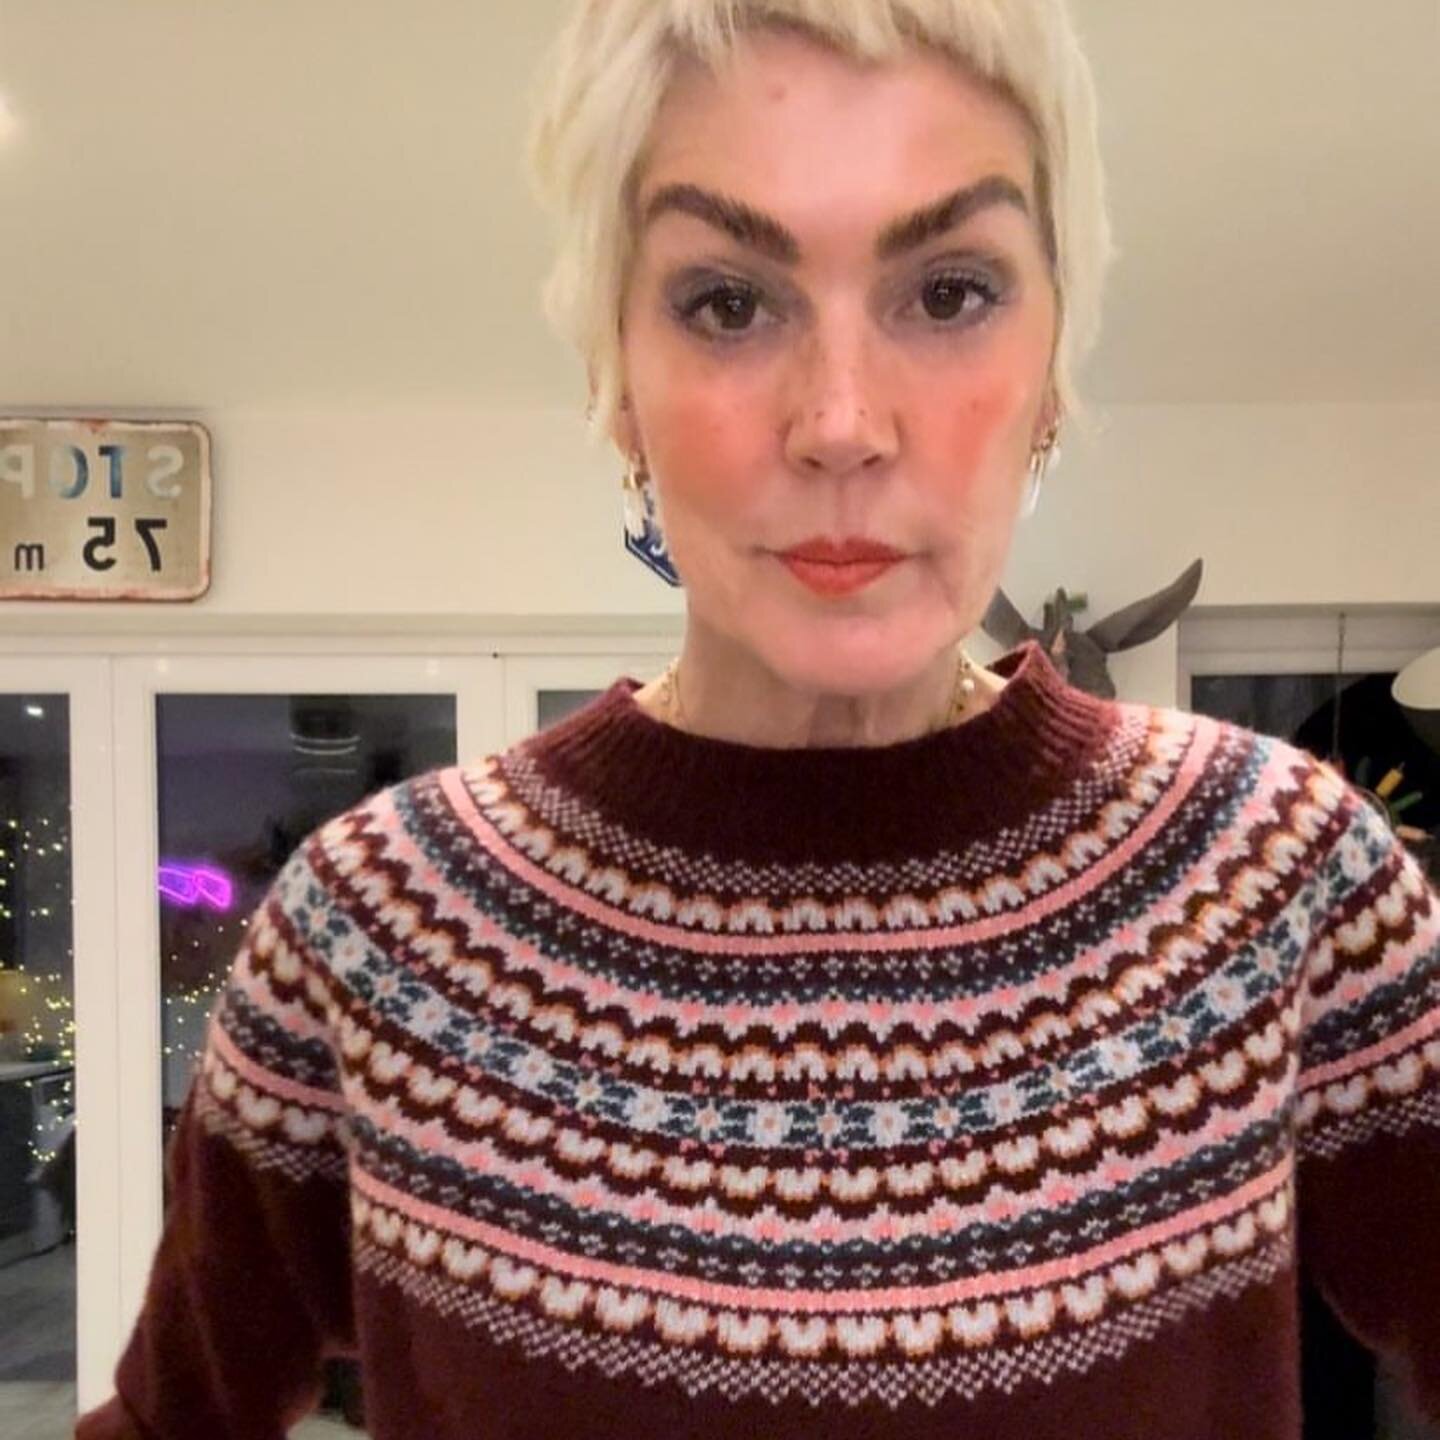 The amazing and funny Astrid 
@astridiwantyouinmylife made the gorgeous reel ( on stories and reels ) featuring our Jumper and so we&rsquo;ve you can use this code 
25%ASTRID for 25% off this jumper - 
We love her styling here with a menswear edge to